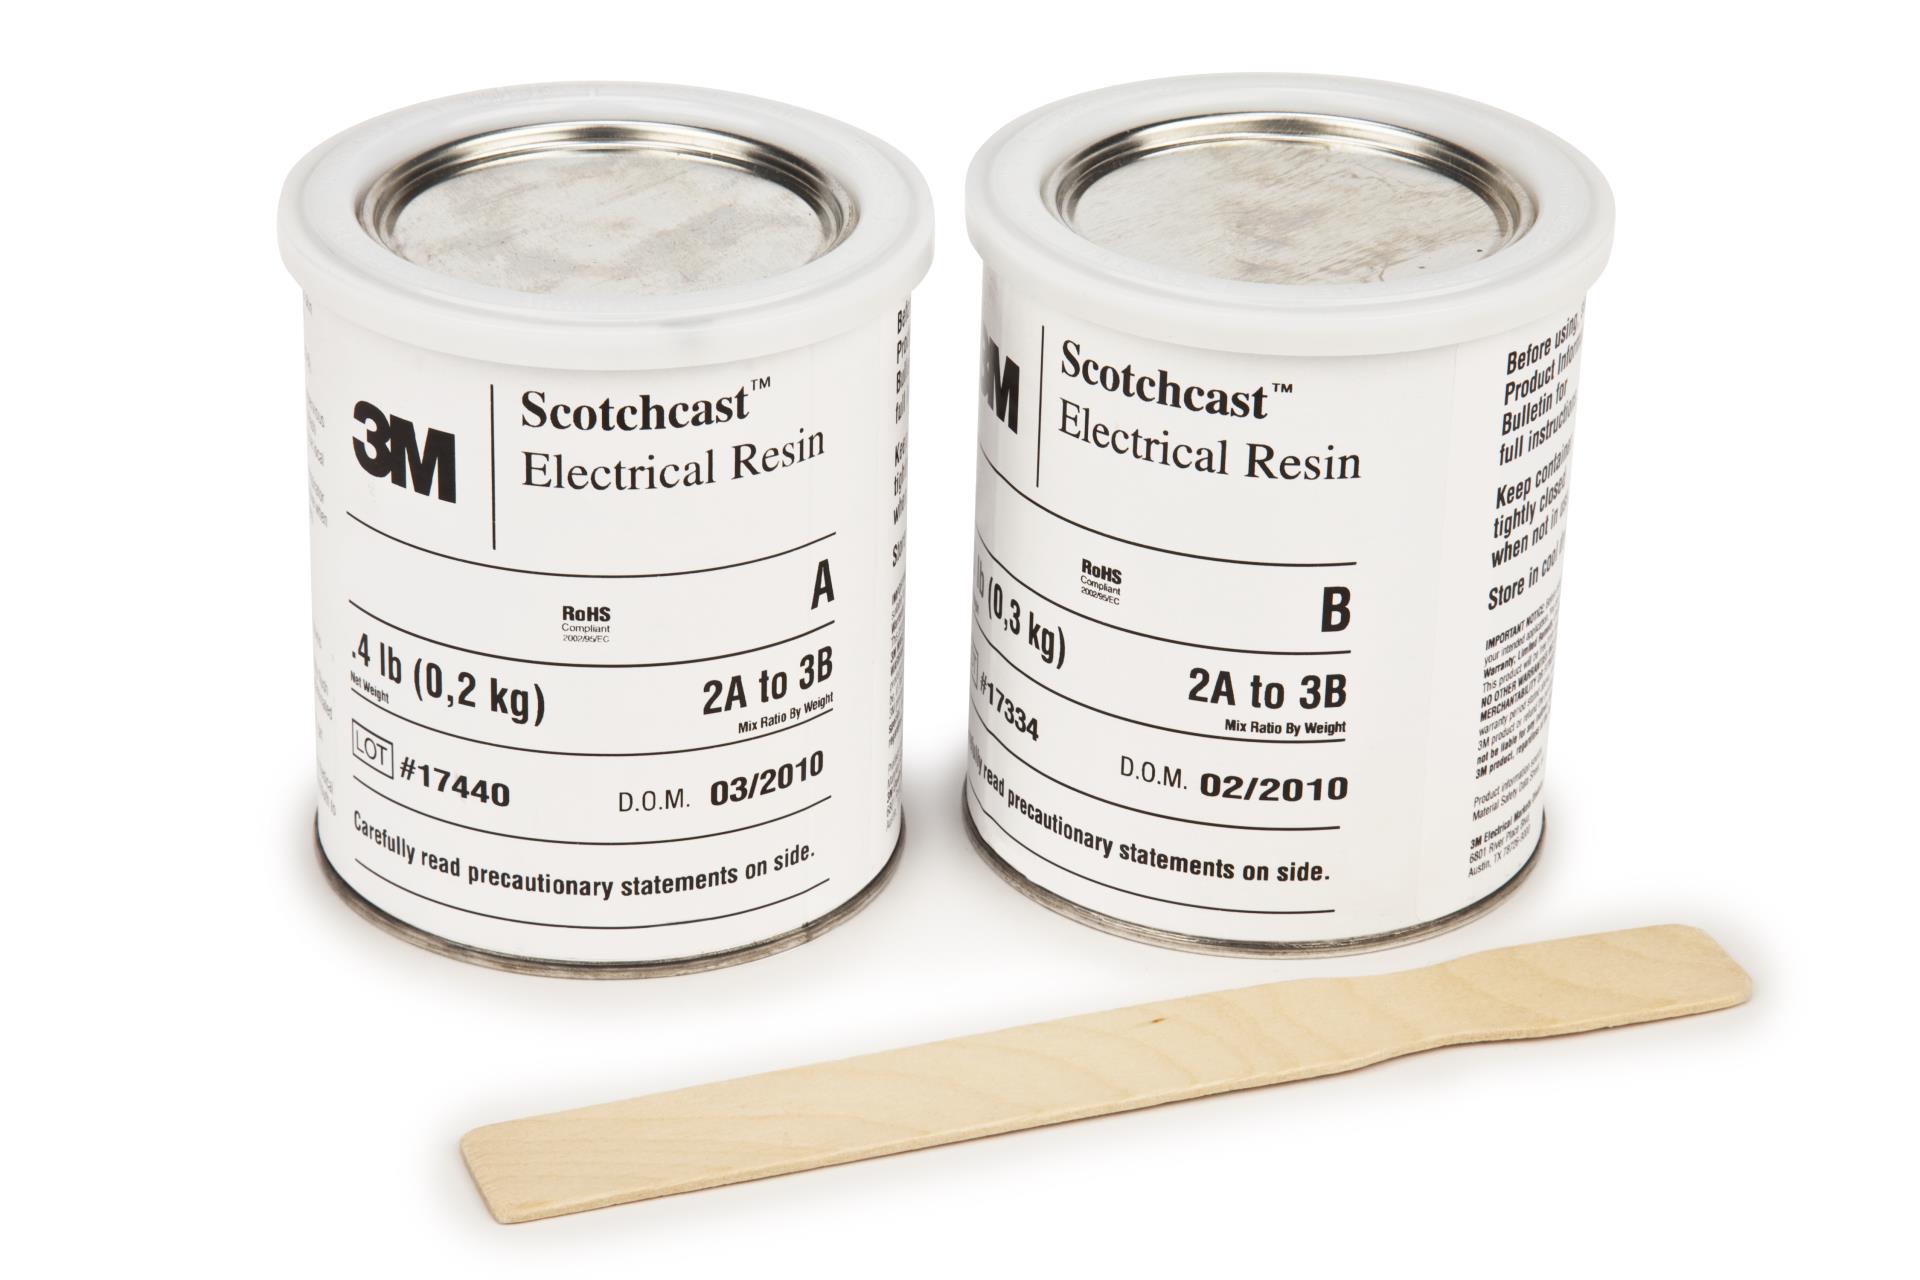 3M™ Scotchcast™ Electrical Resin MR283FO75 (15 lb), Kits/Case Aircraft  9390991